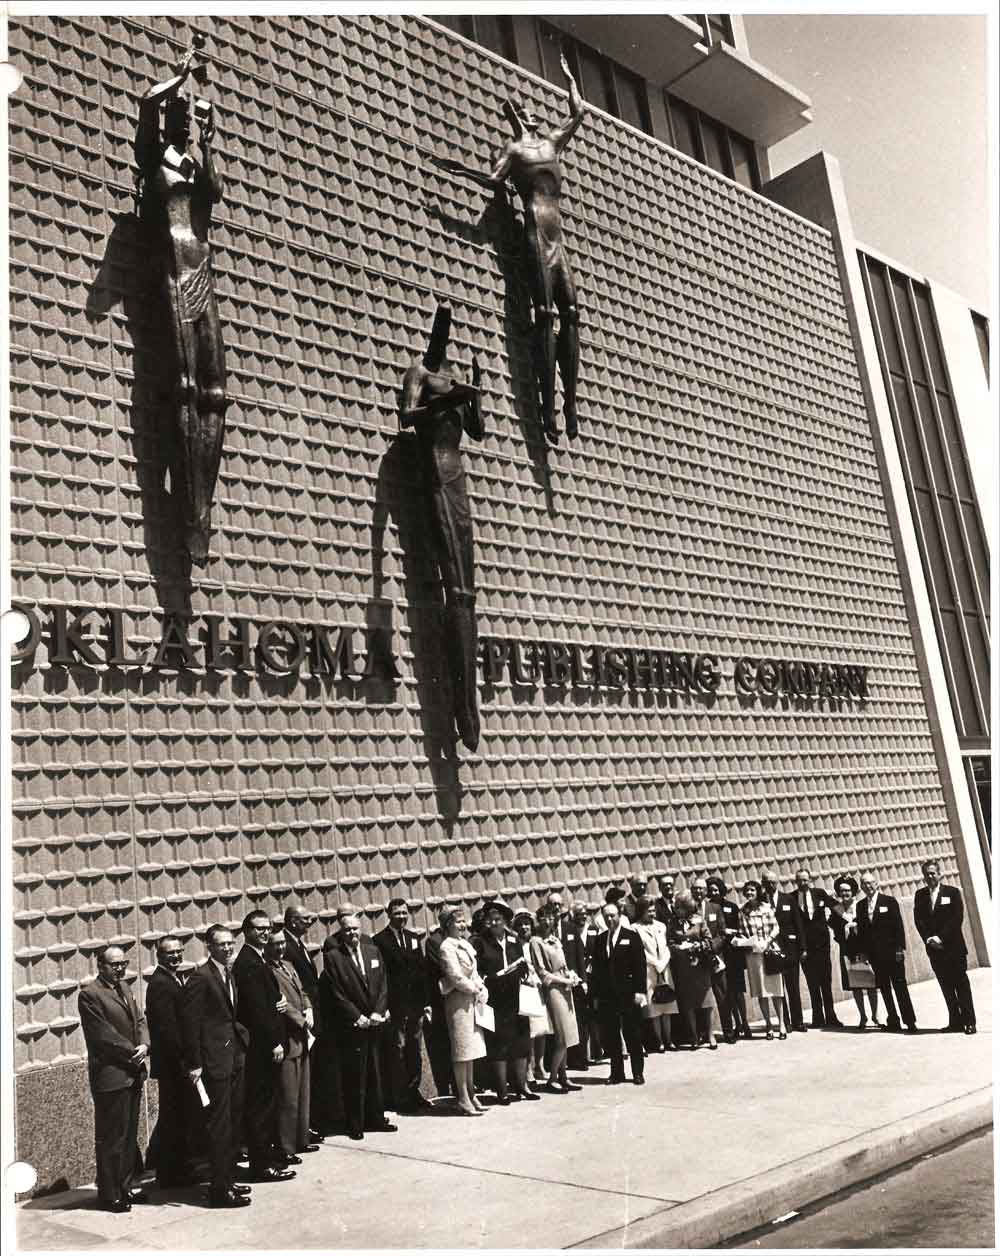 (HTC.2010.7.01) - Dedication of Statues, Oklahoma Publishing Company Office Building, North Side, Unit Block of NW 4, c. 14 April 1964